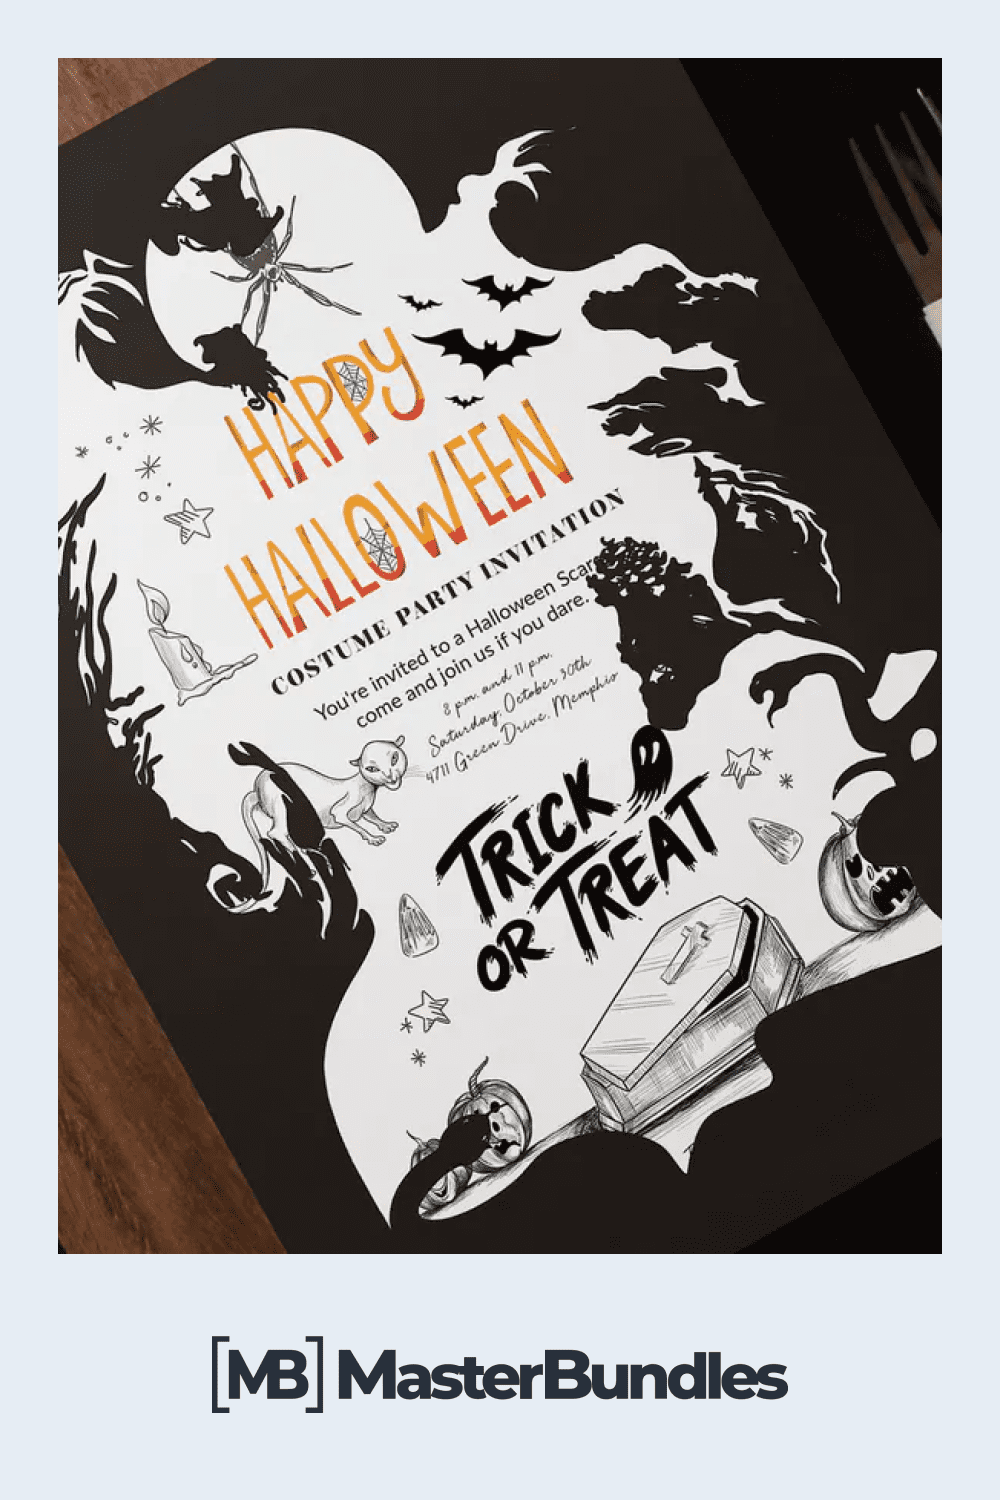 A themed invitation to a Halloween celebration that makes the theme clear at a glance.